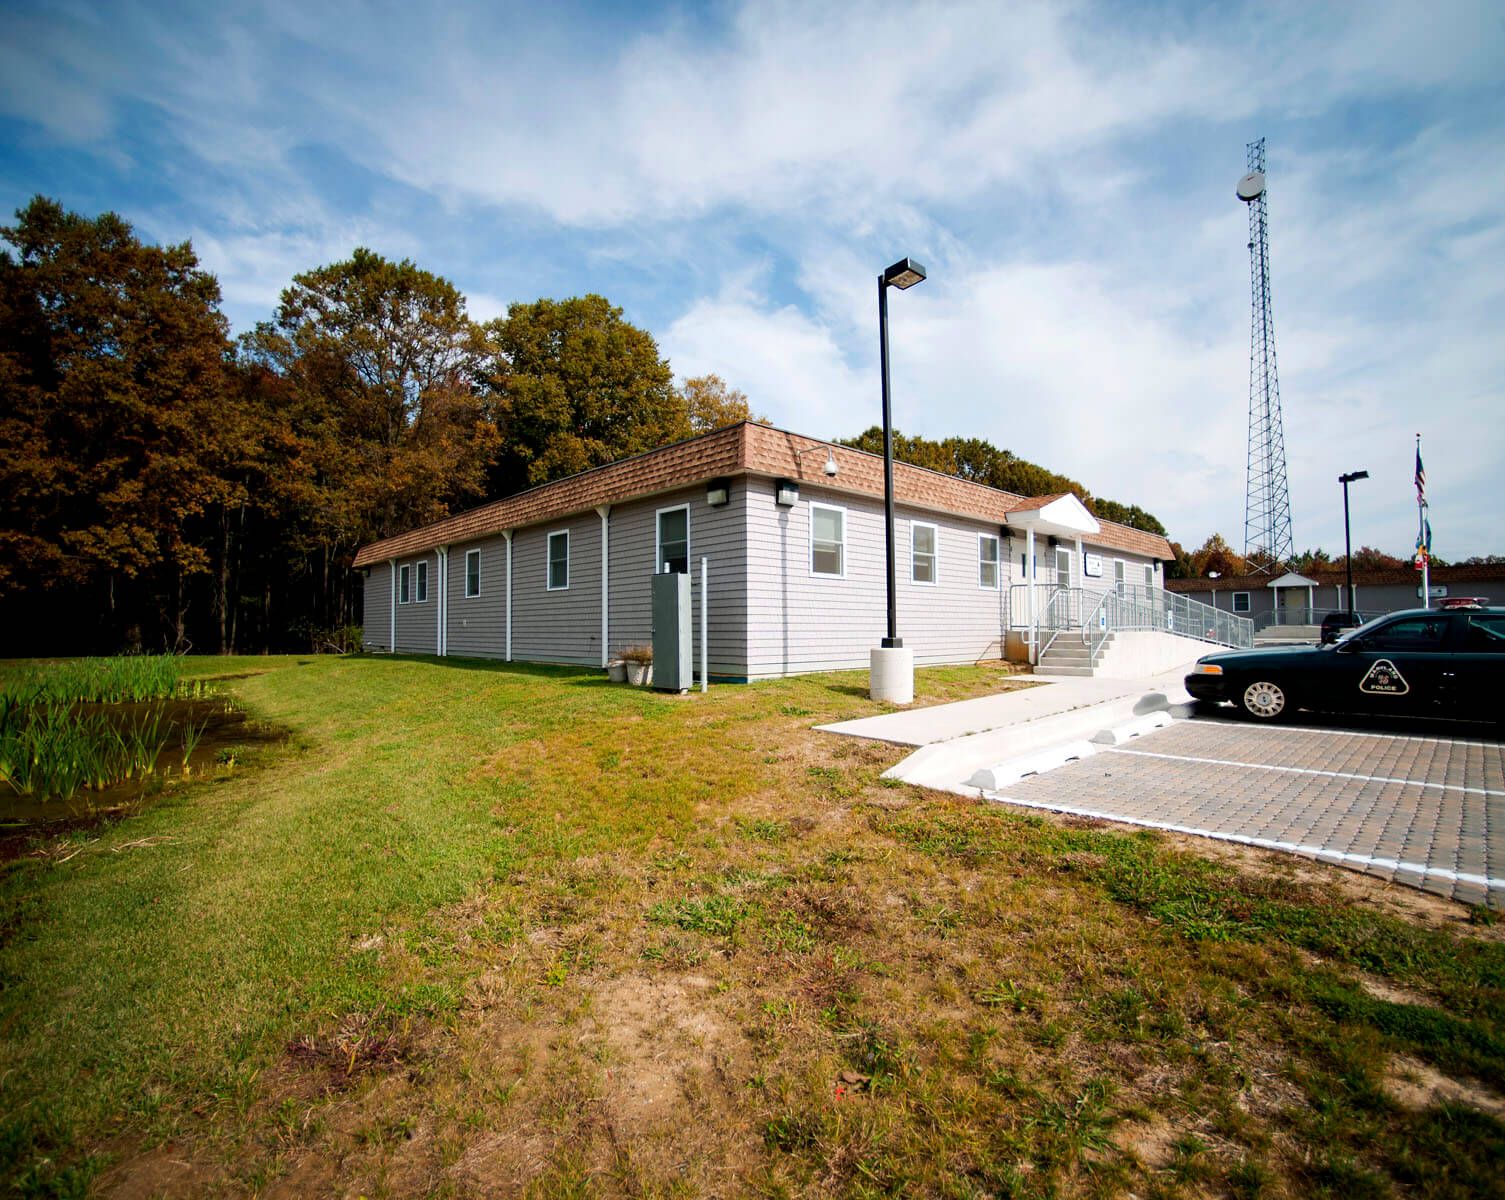 MD-State-Police-Modular-Communications-Building-Exterior-3